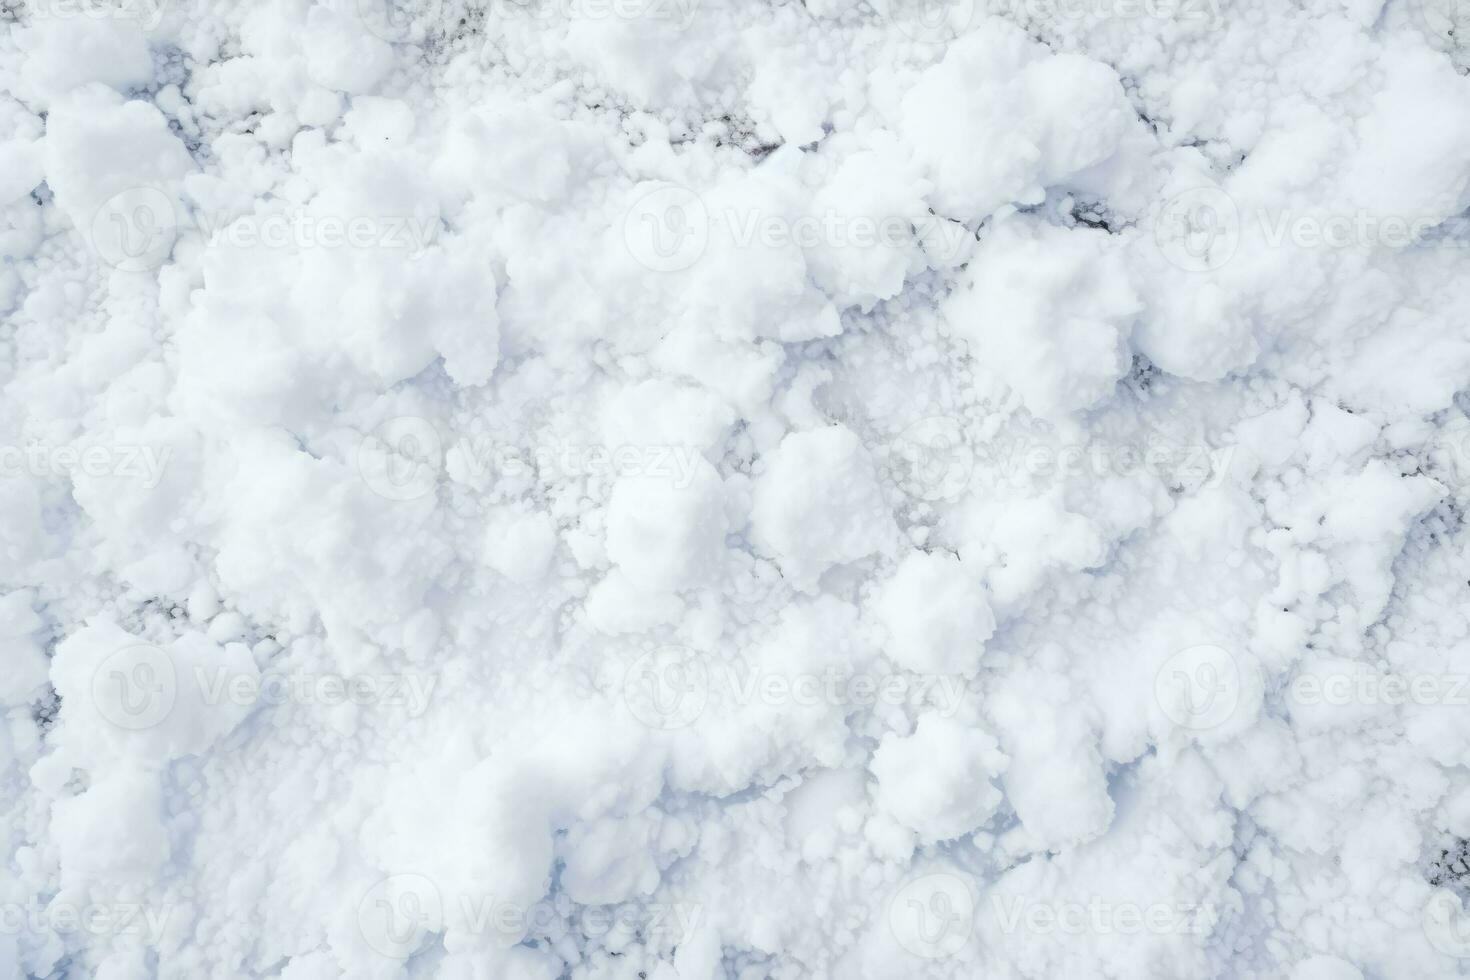 Freshly fallen snow texture background with a pristine white appearance photo